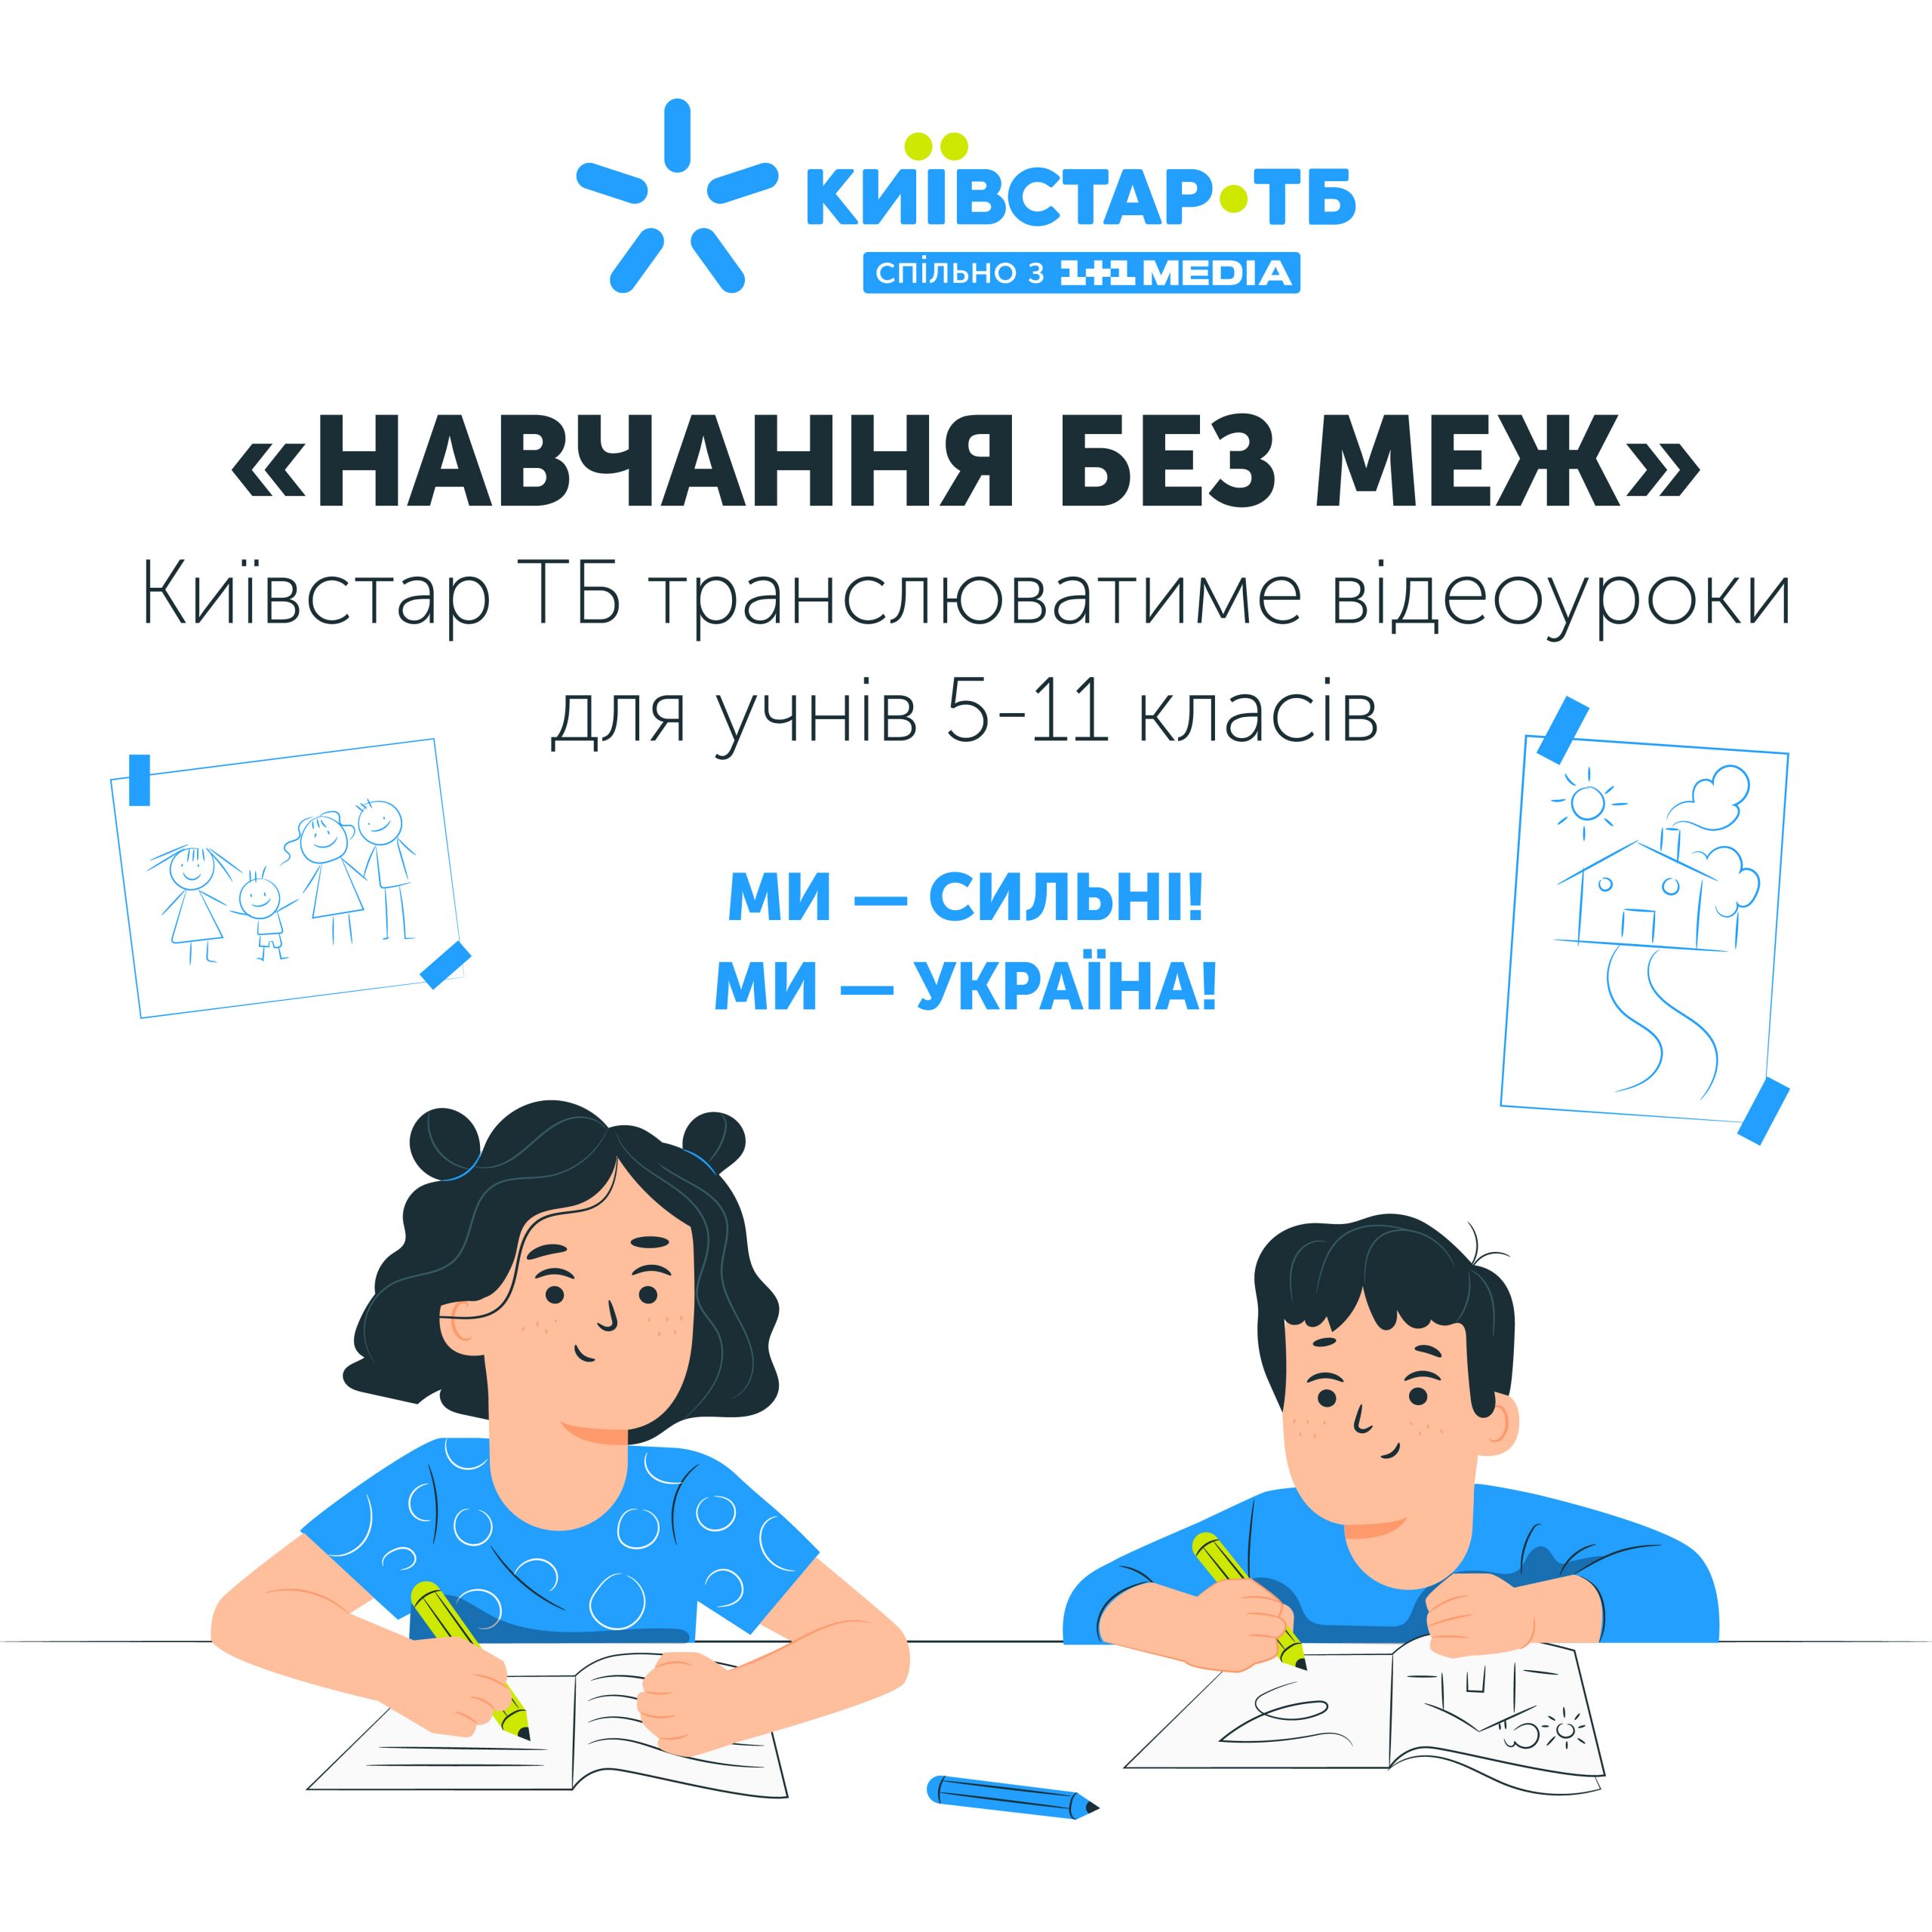 Lessons from the All-Ukrainian School online and other content for distance learning are available on Kyivstar TV